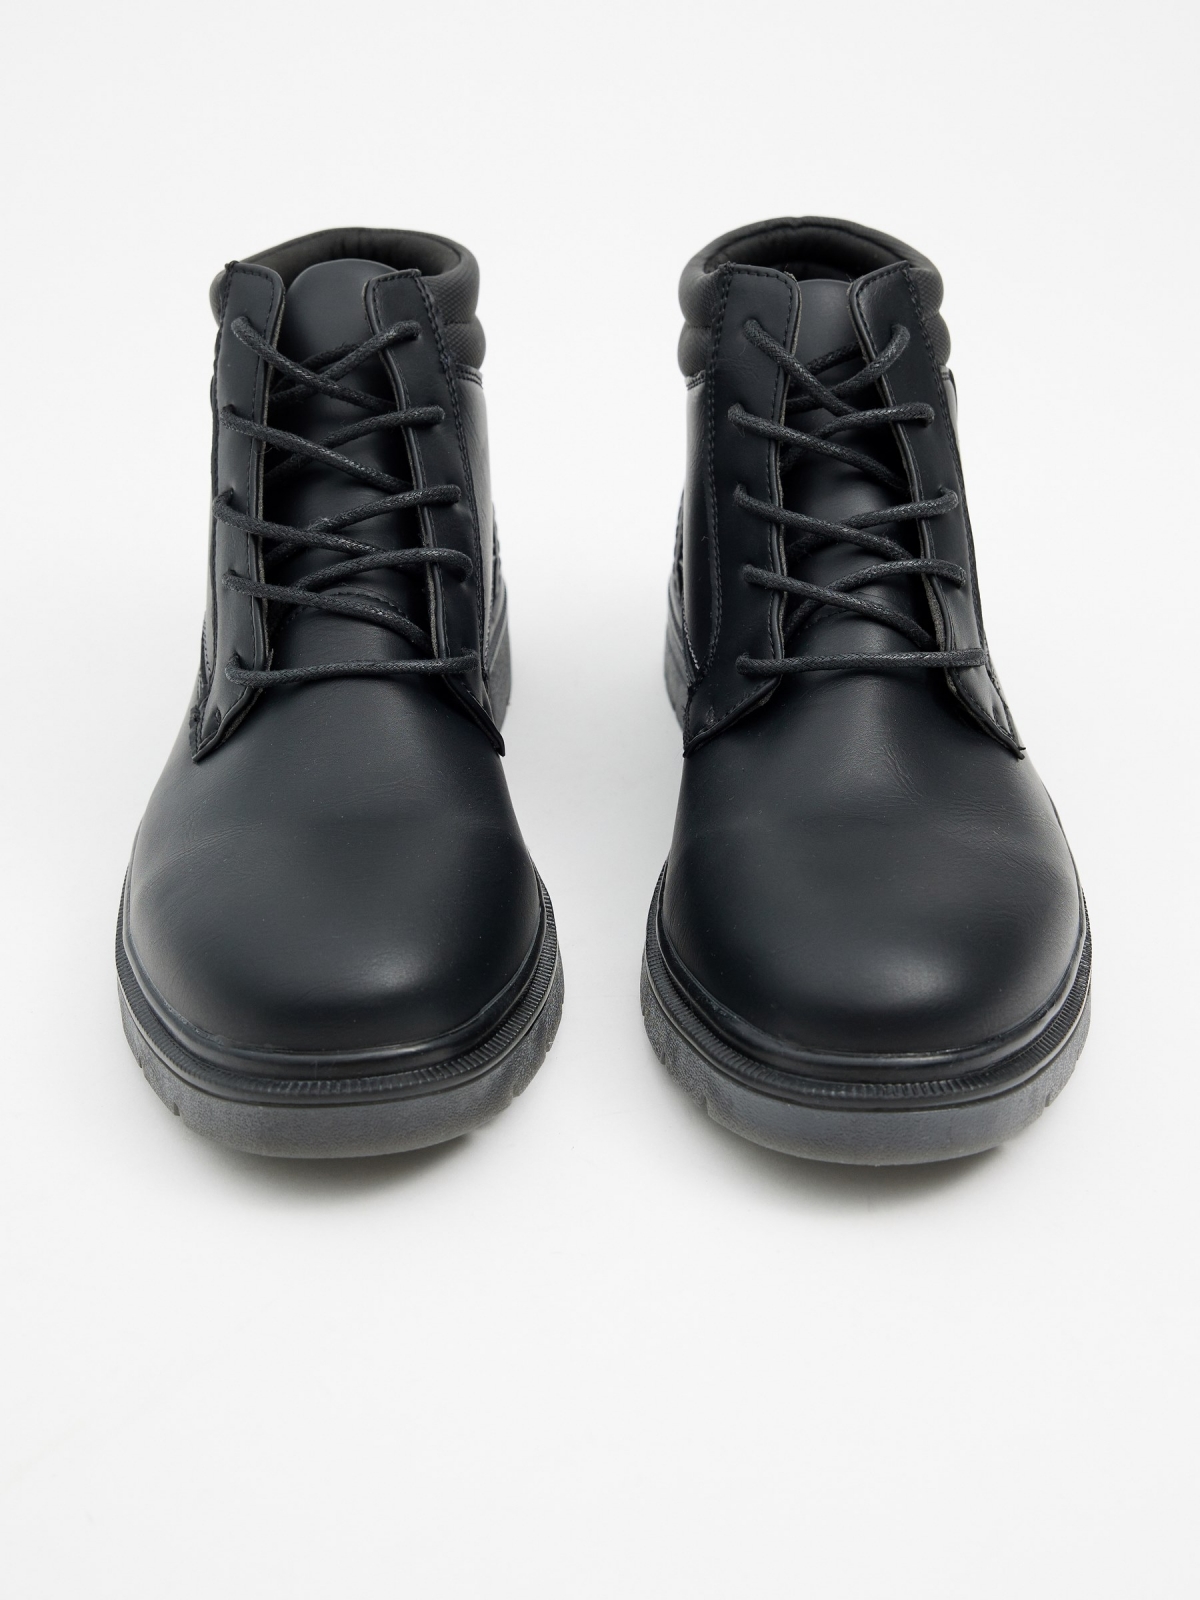 Black leather effect boots with stitching black zenithal view